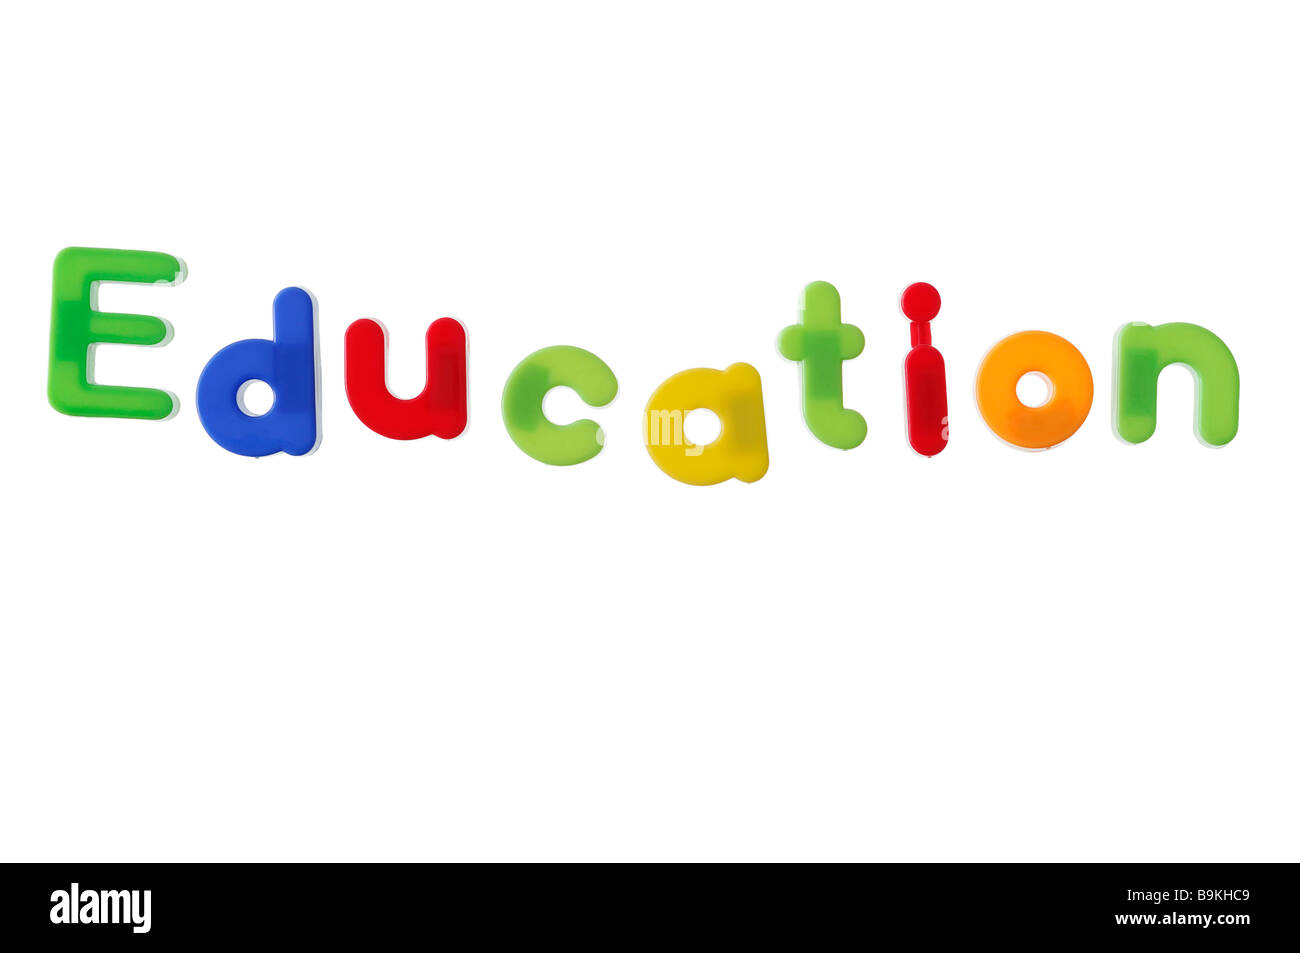 Education Written with Magnetic Letters Stock Photo